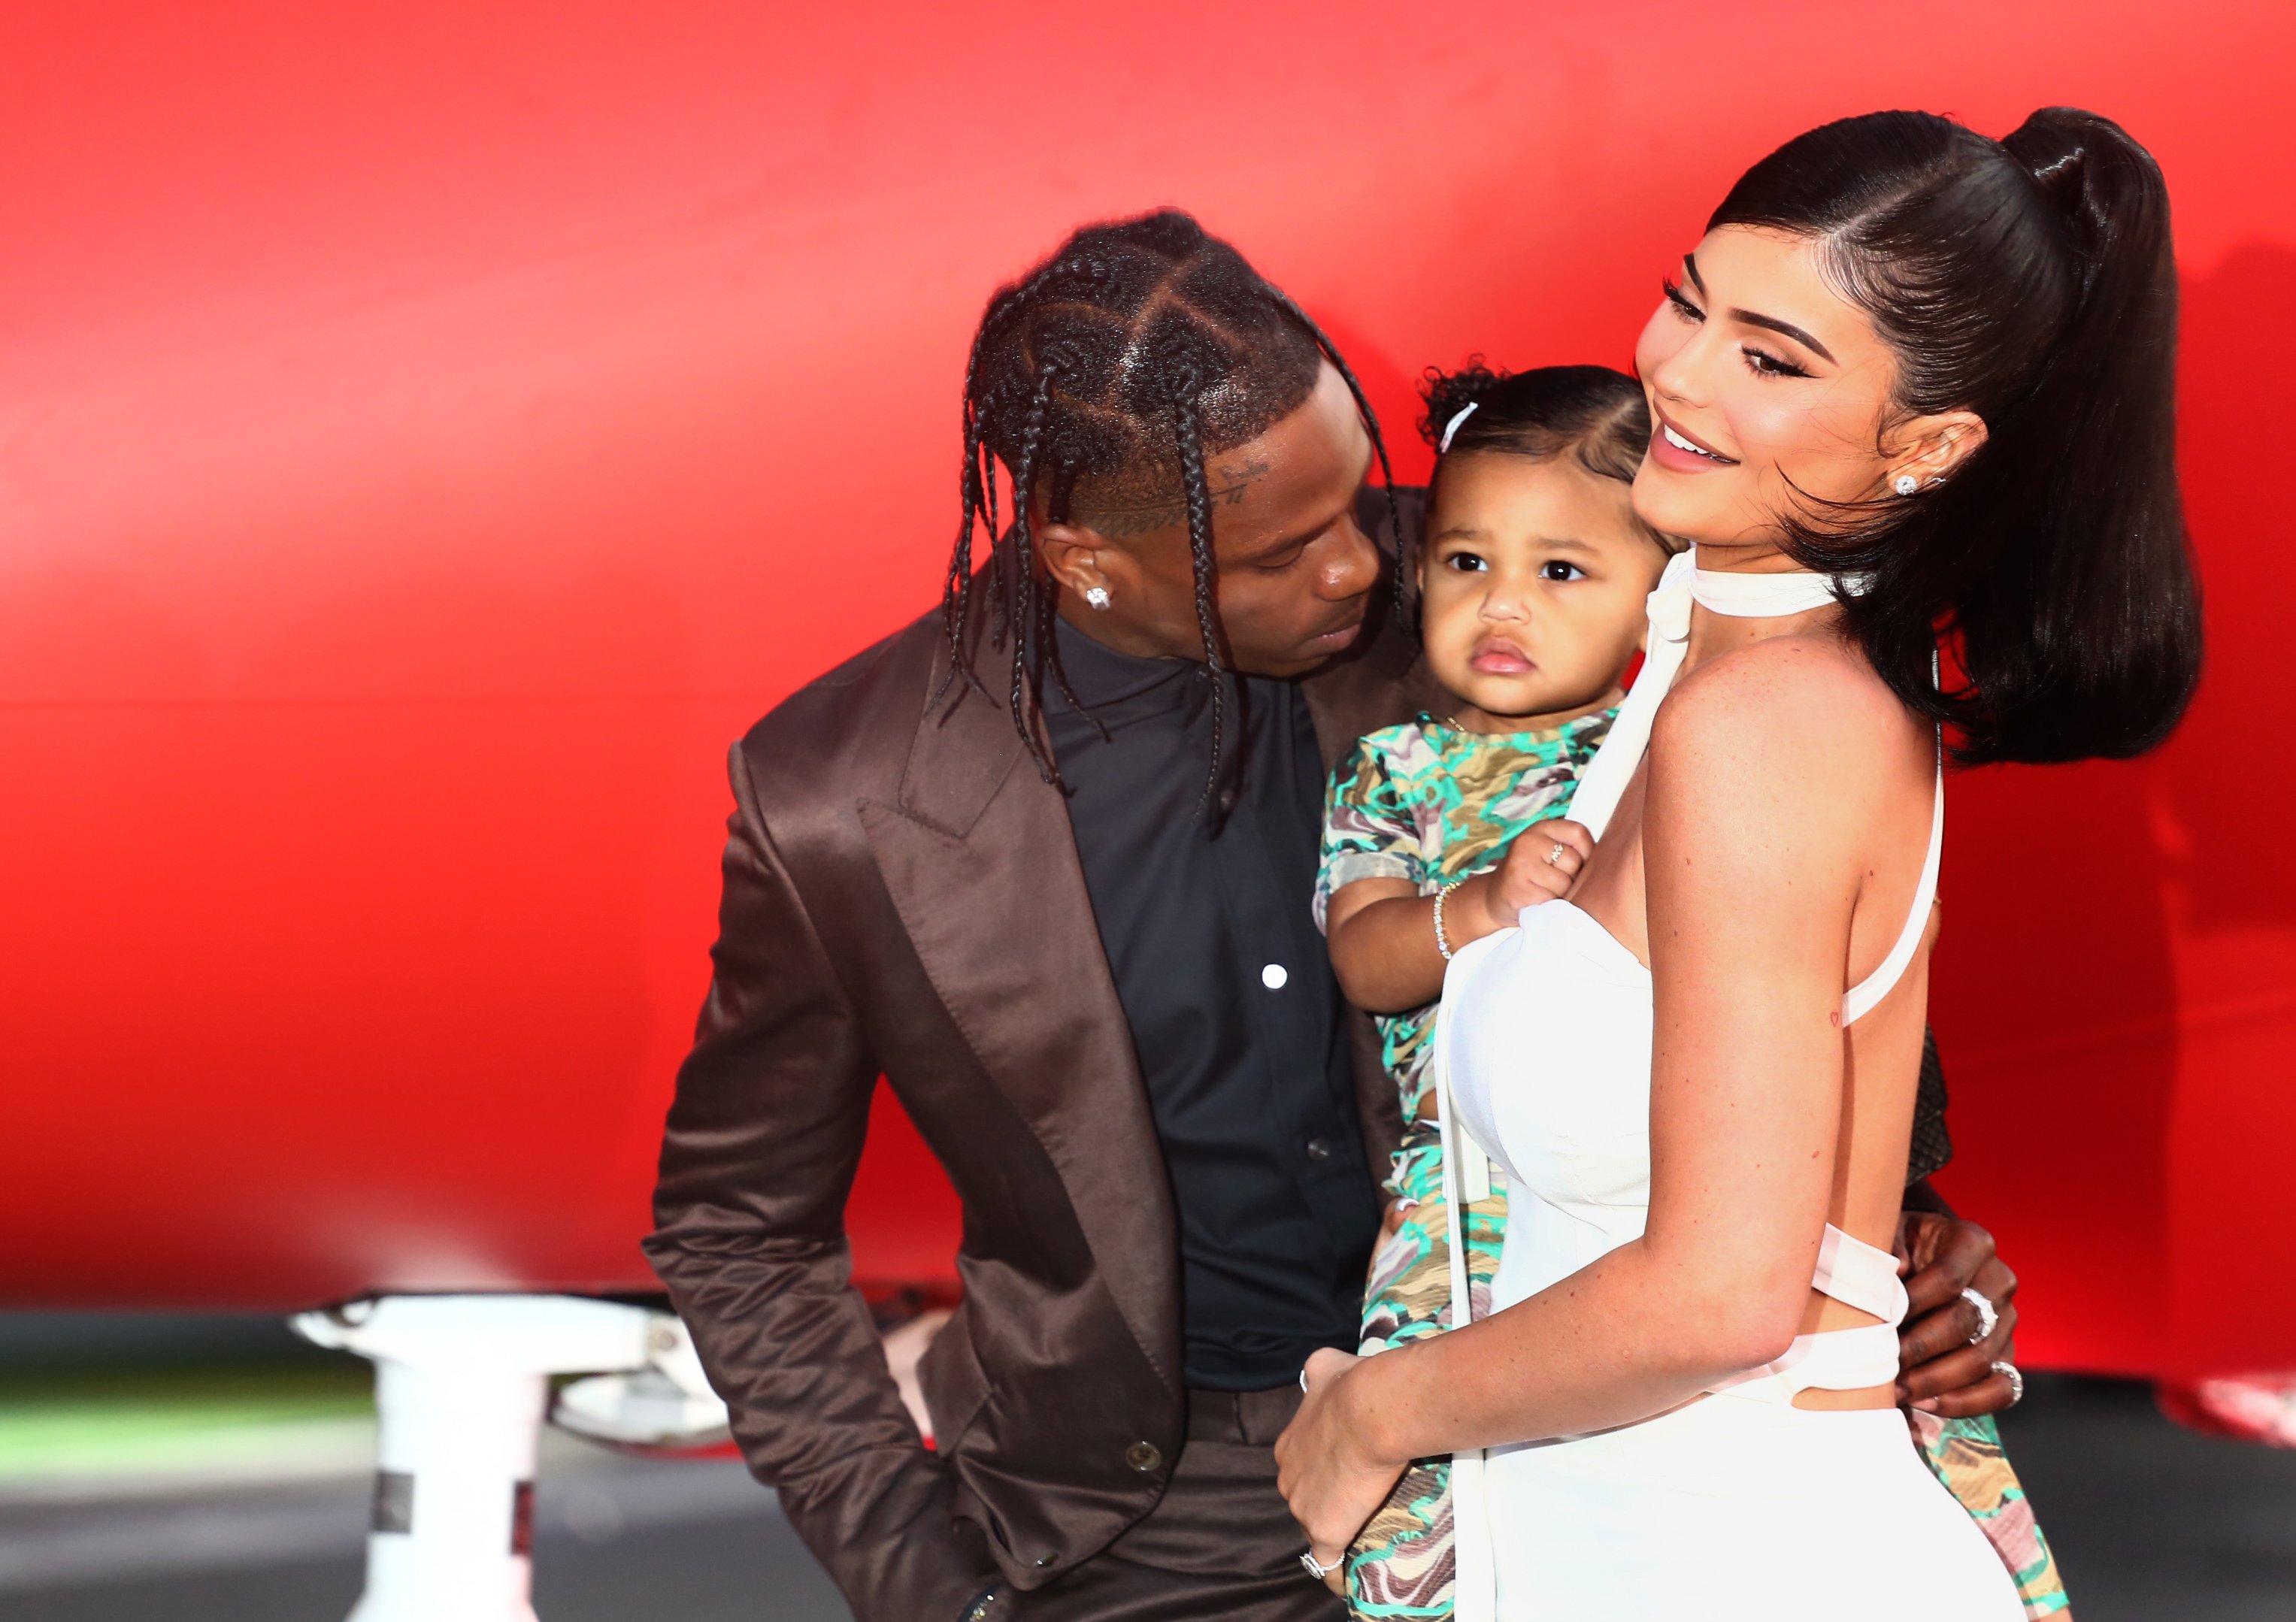 Travis Scott and Kylie Jenner attend the Travis Scott: "Look Mom I Can Fly" Los Angeles Premiere on August 27, 2019, in Santa Monica, California. | Source: Getty Images.